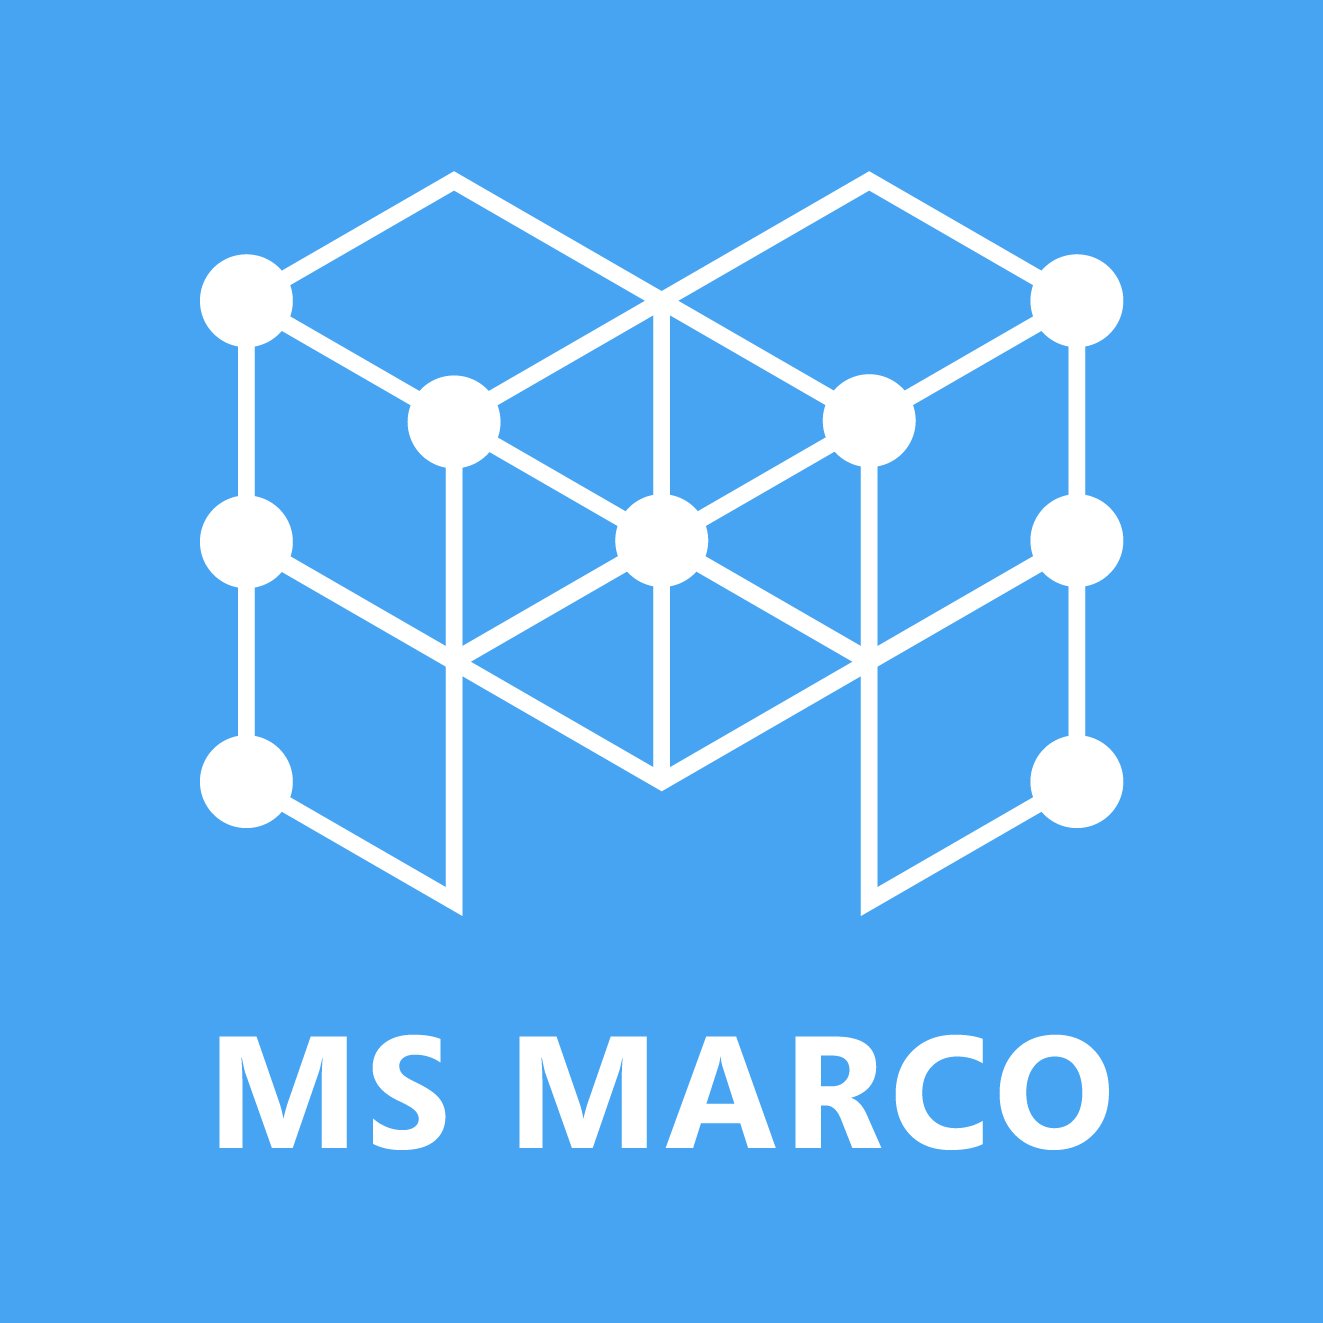 Team Account for MSMARCO